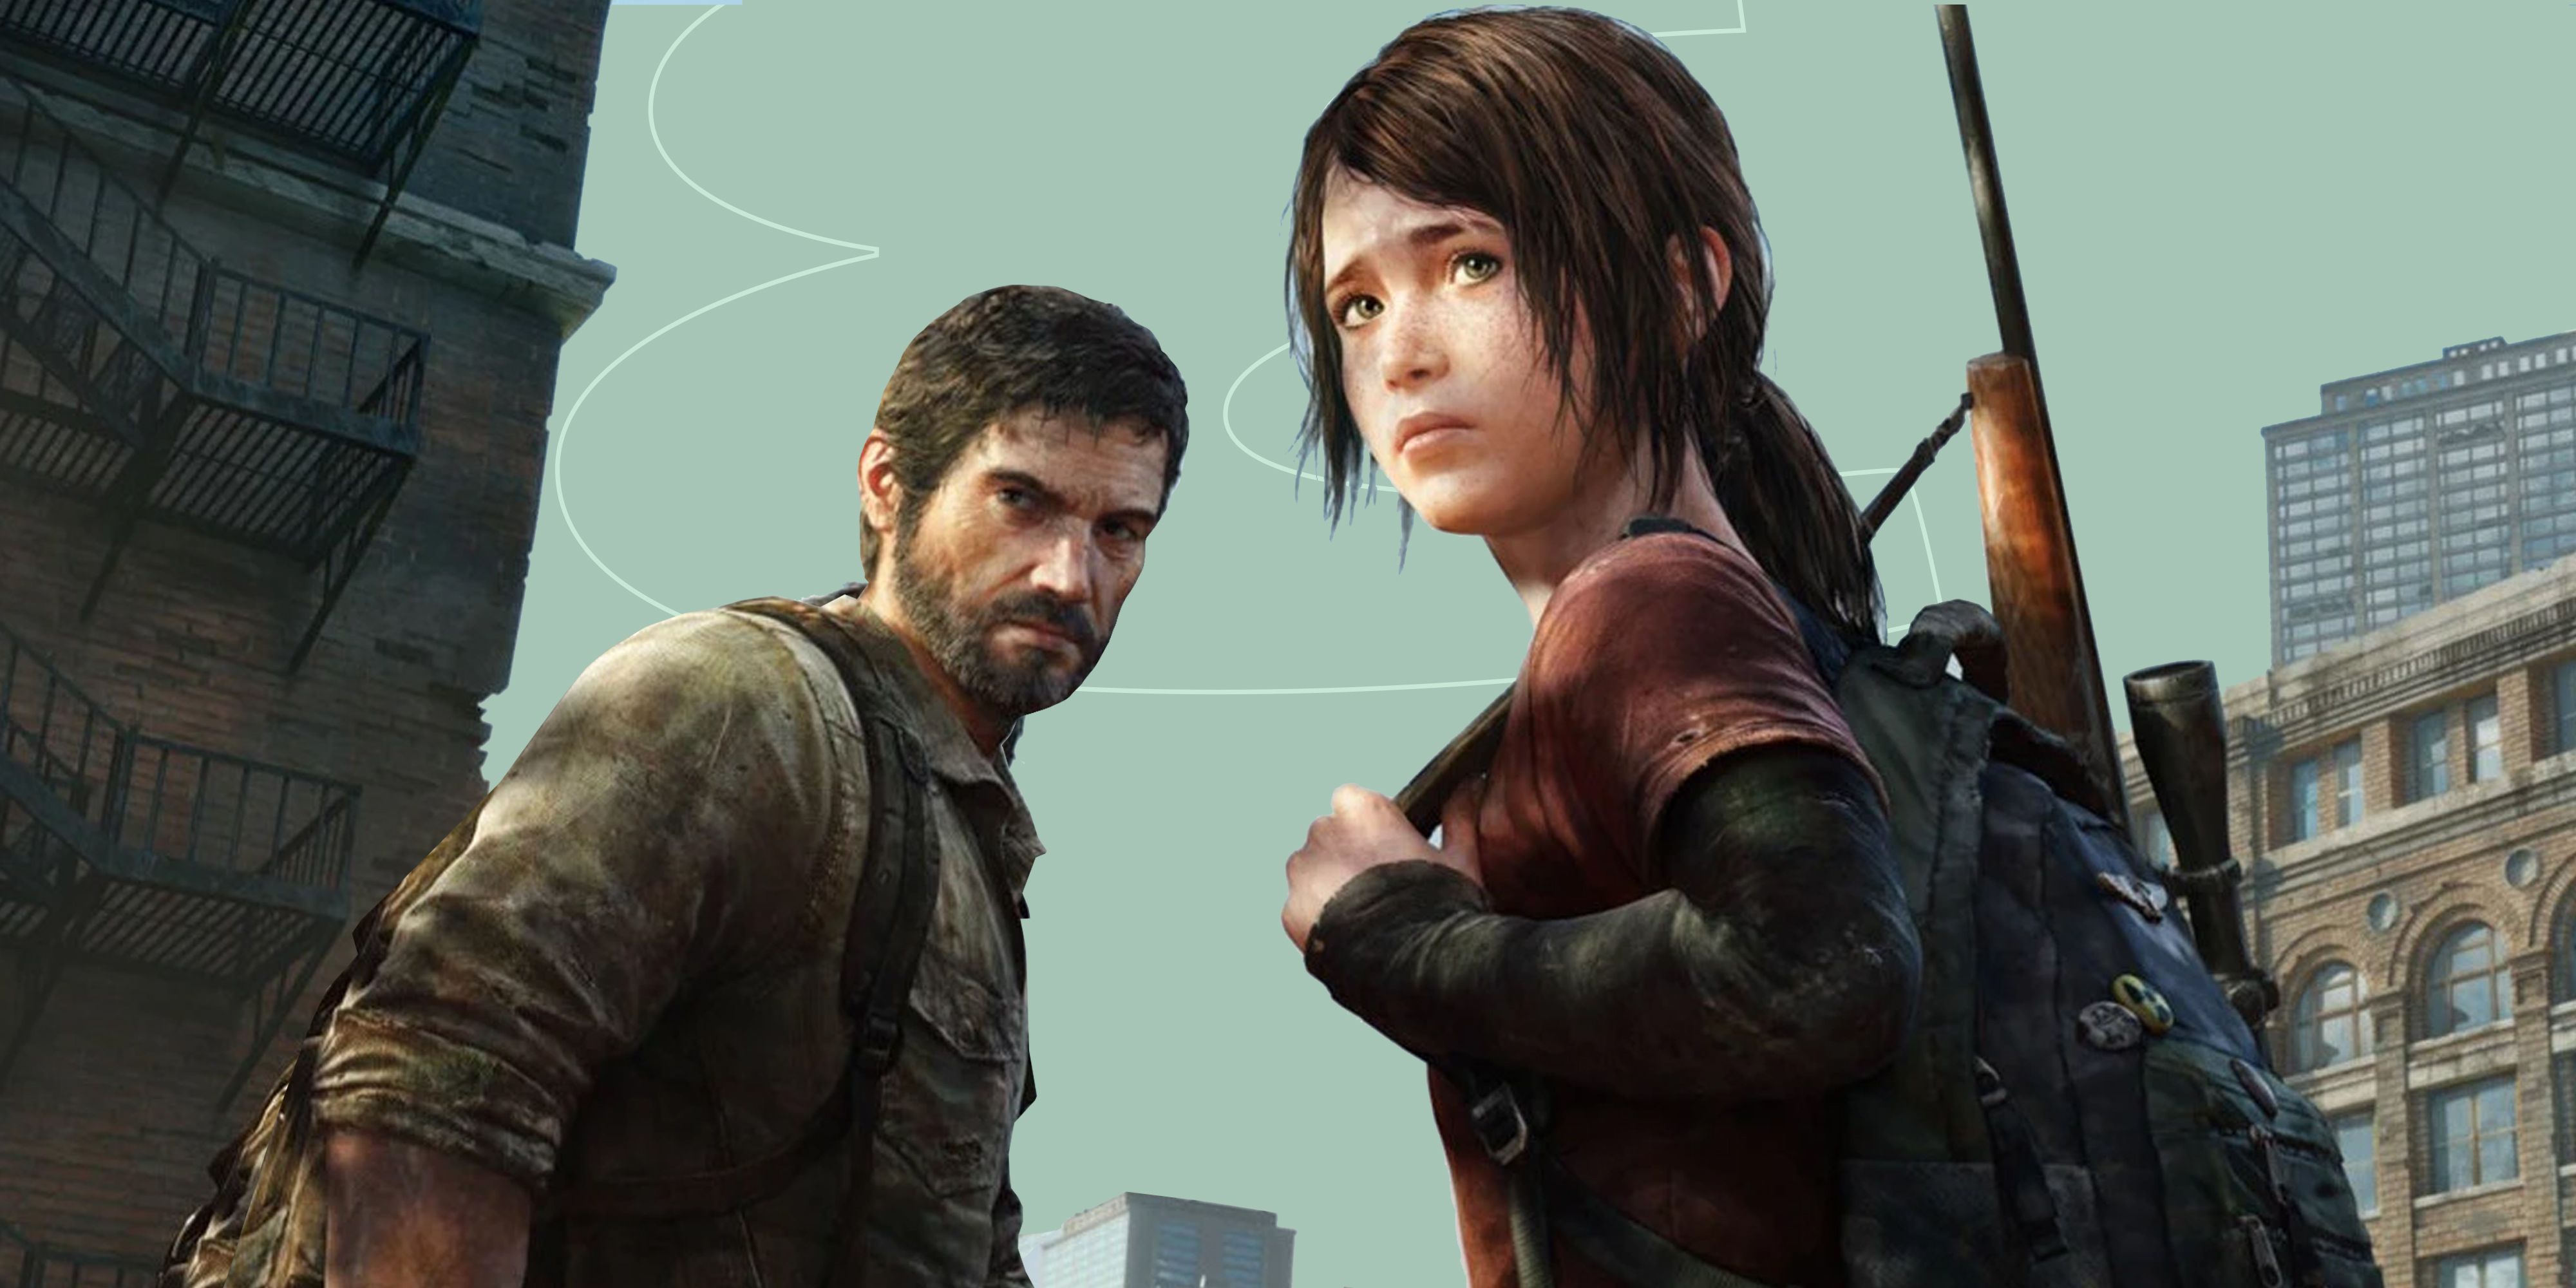 The Last of Us Part 1 is now out on PC. Its an amazing game, but the l